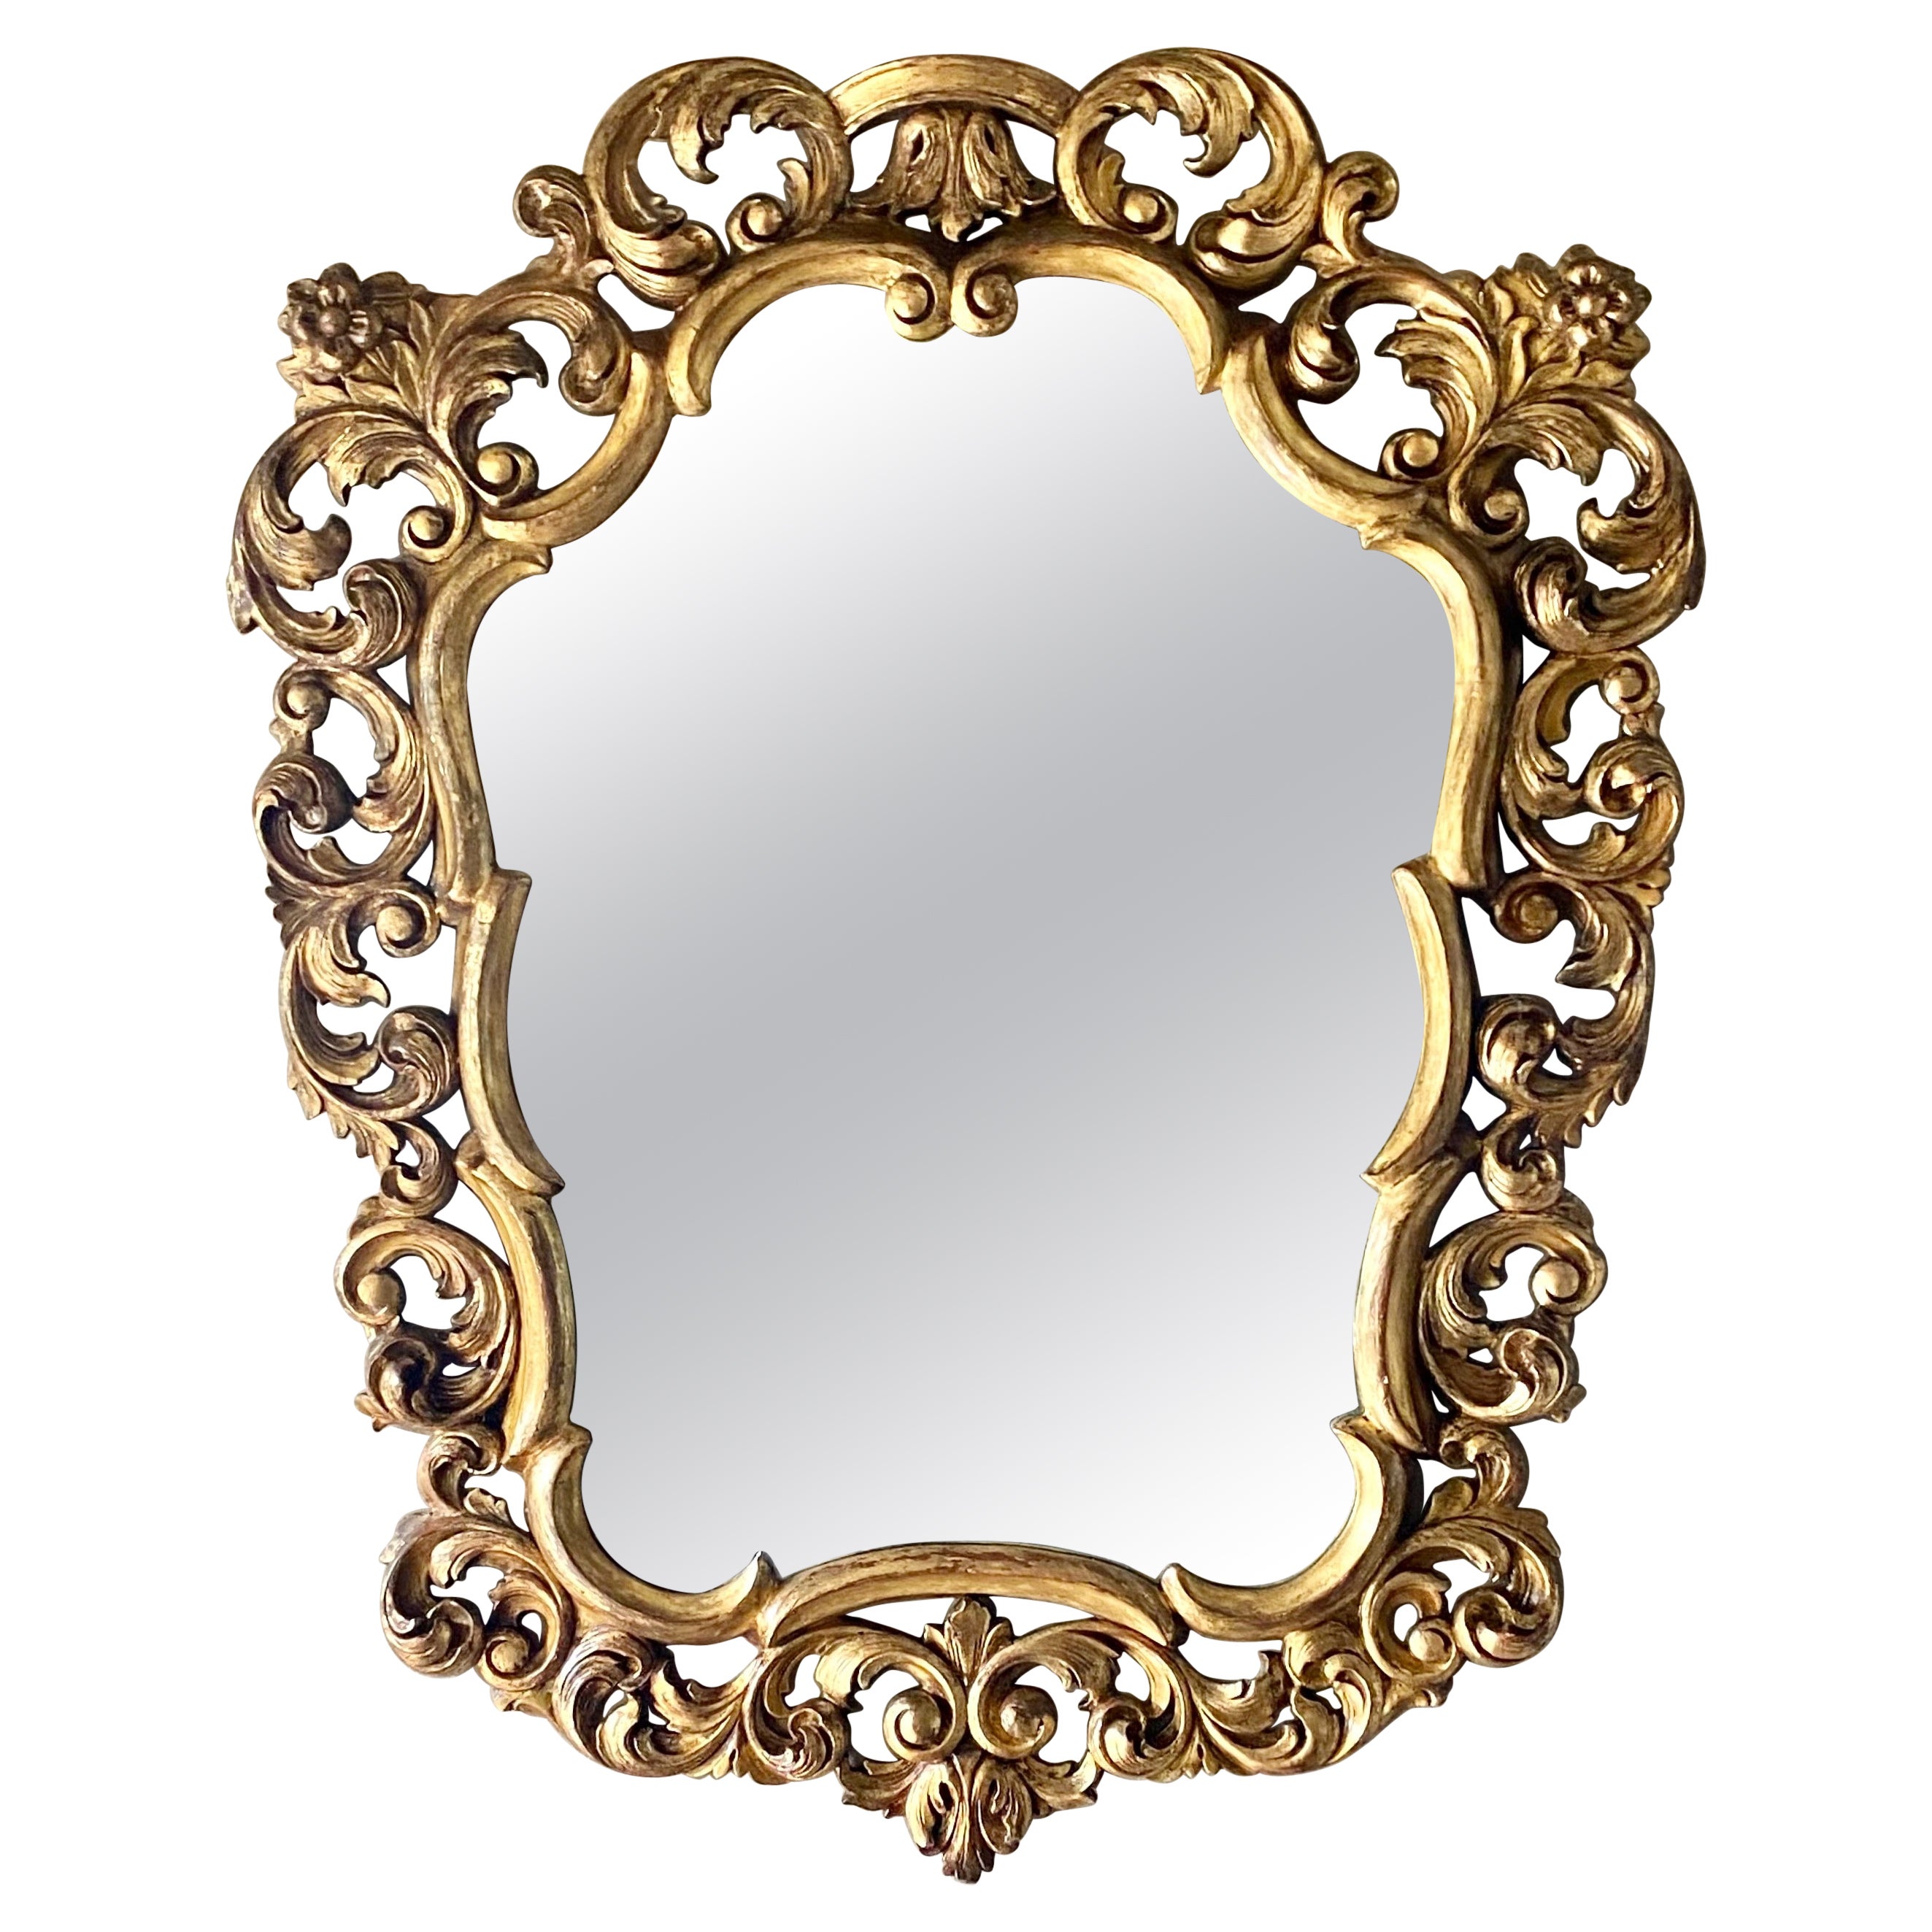 Ornate Carved and Gilt Wood Mirror, Italian, 1940's-1950's For Sale